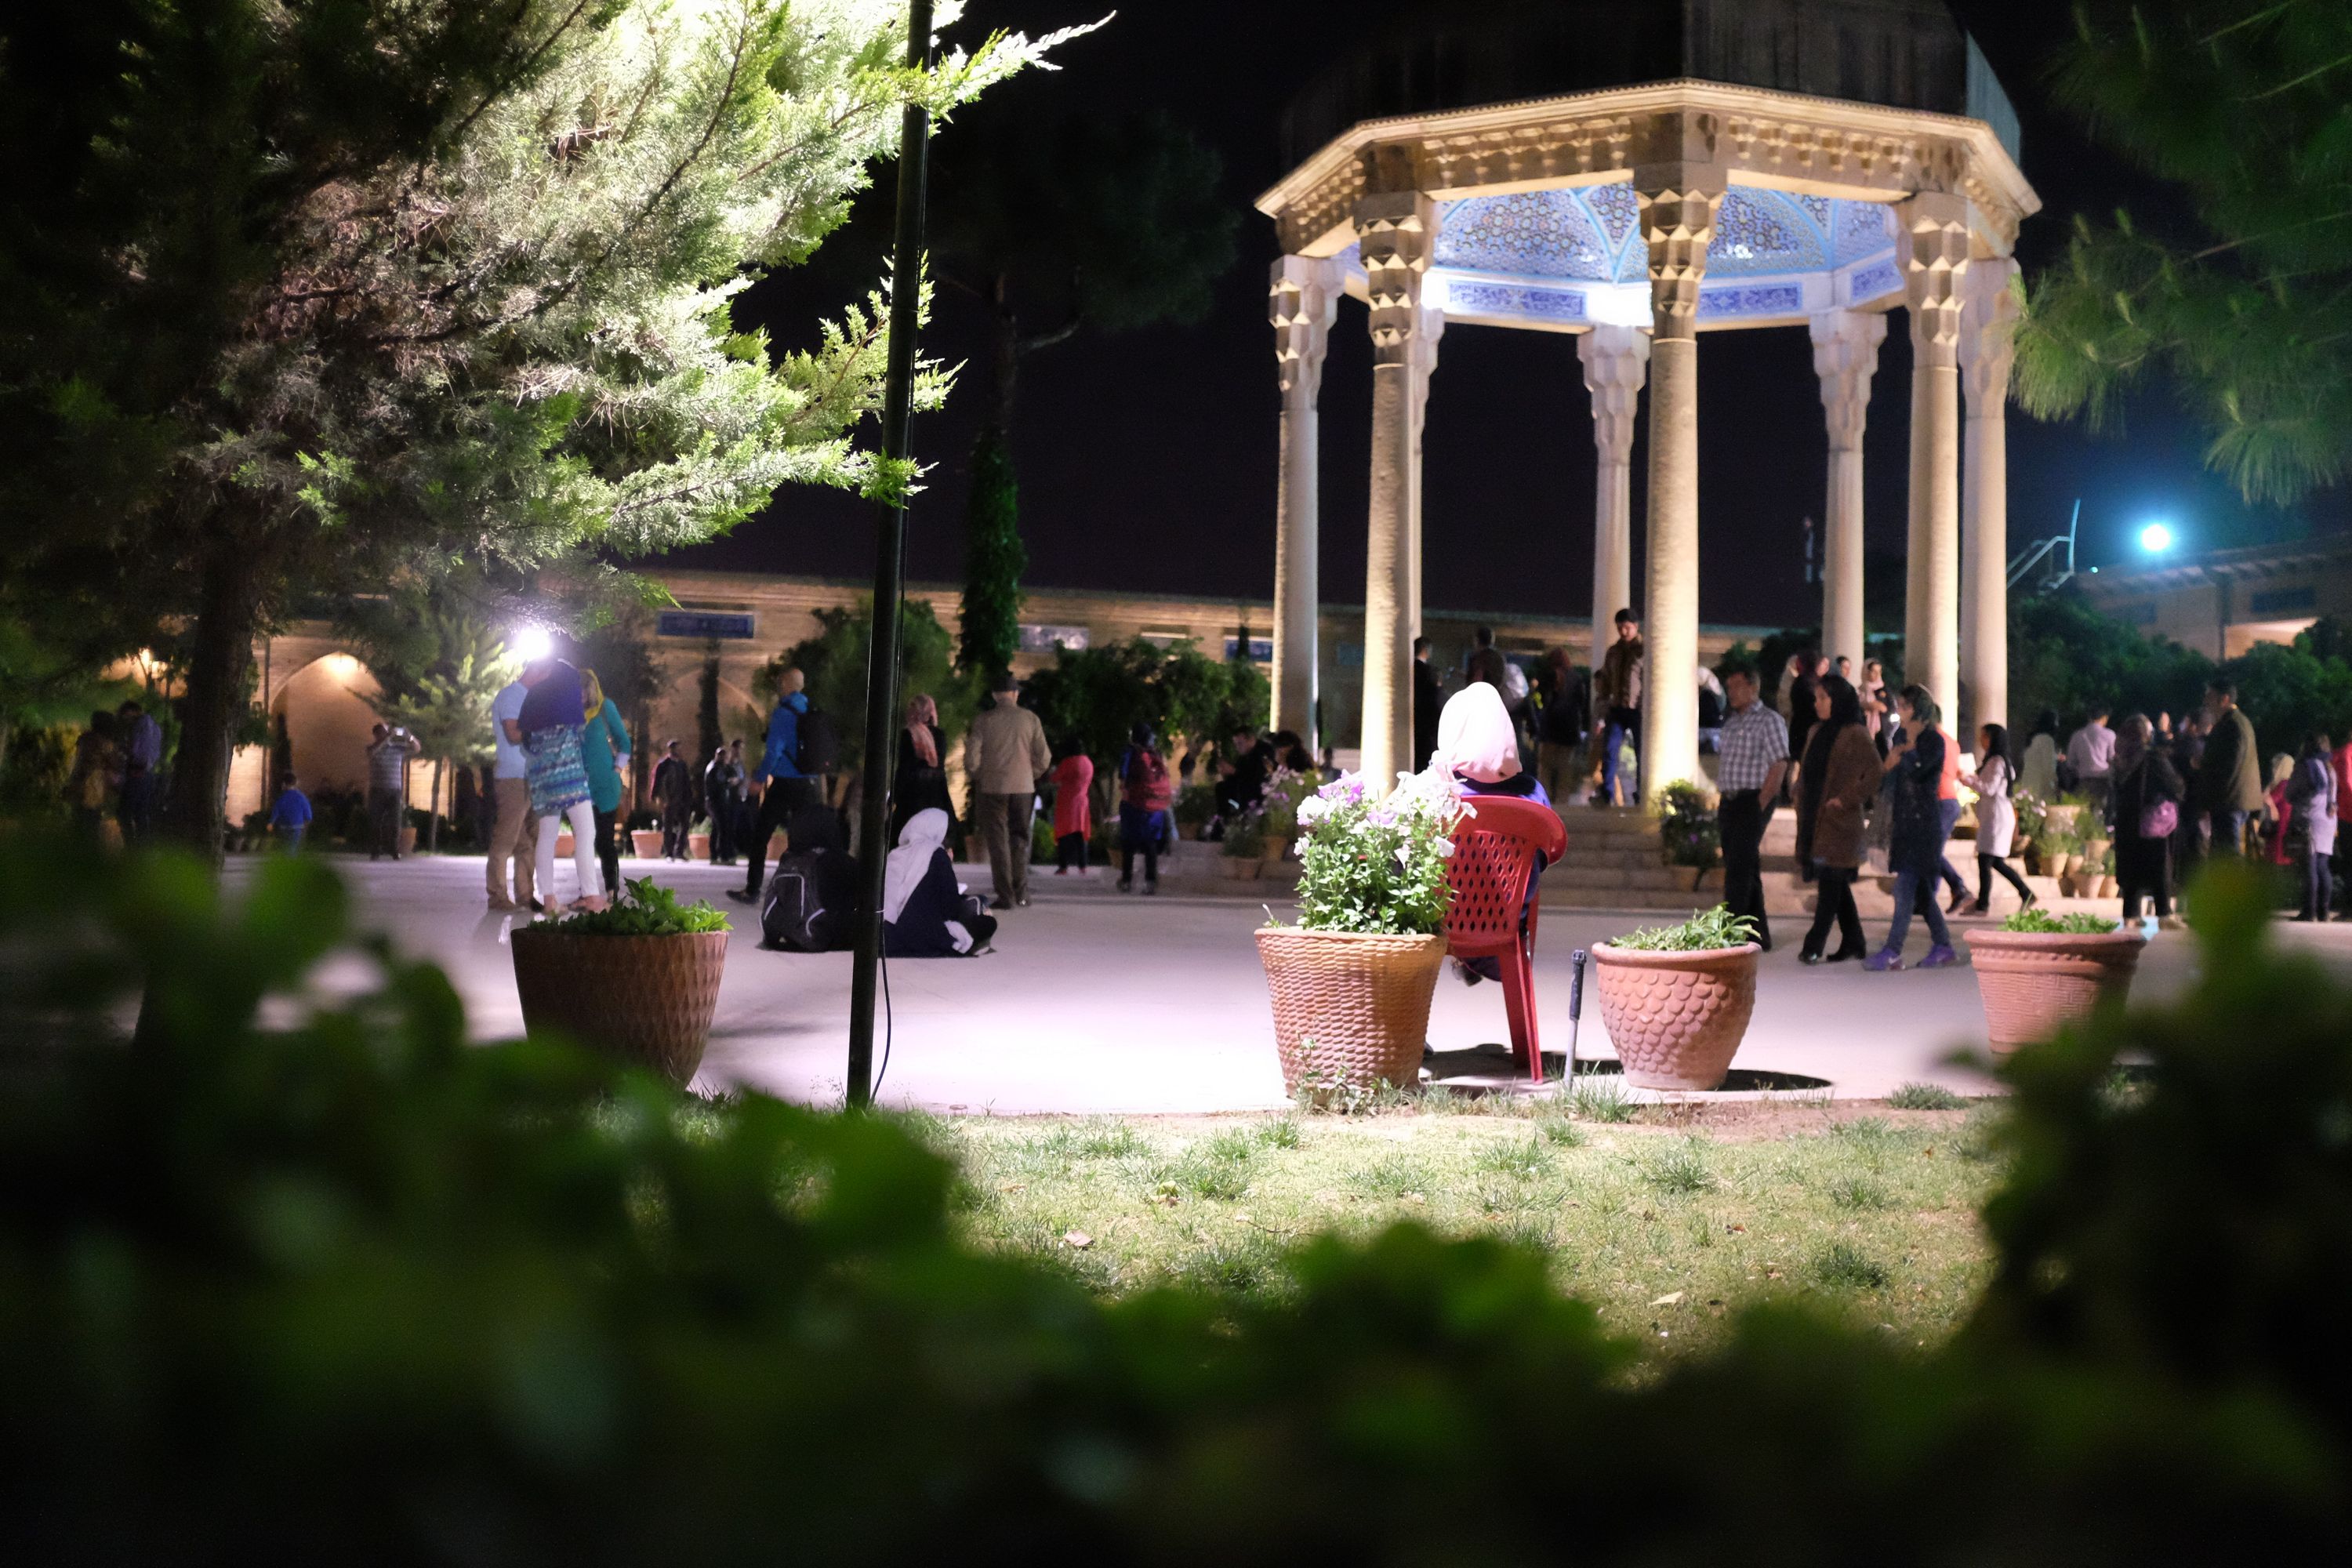 At night, people walk around an octogonal pavilion, framed by trees.